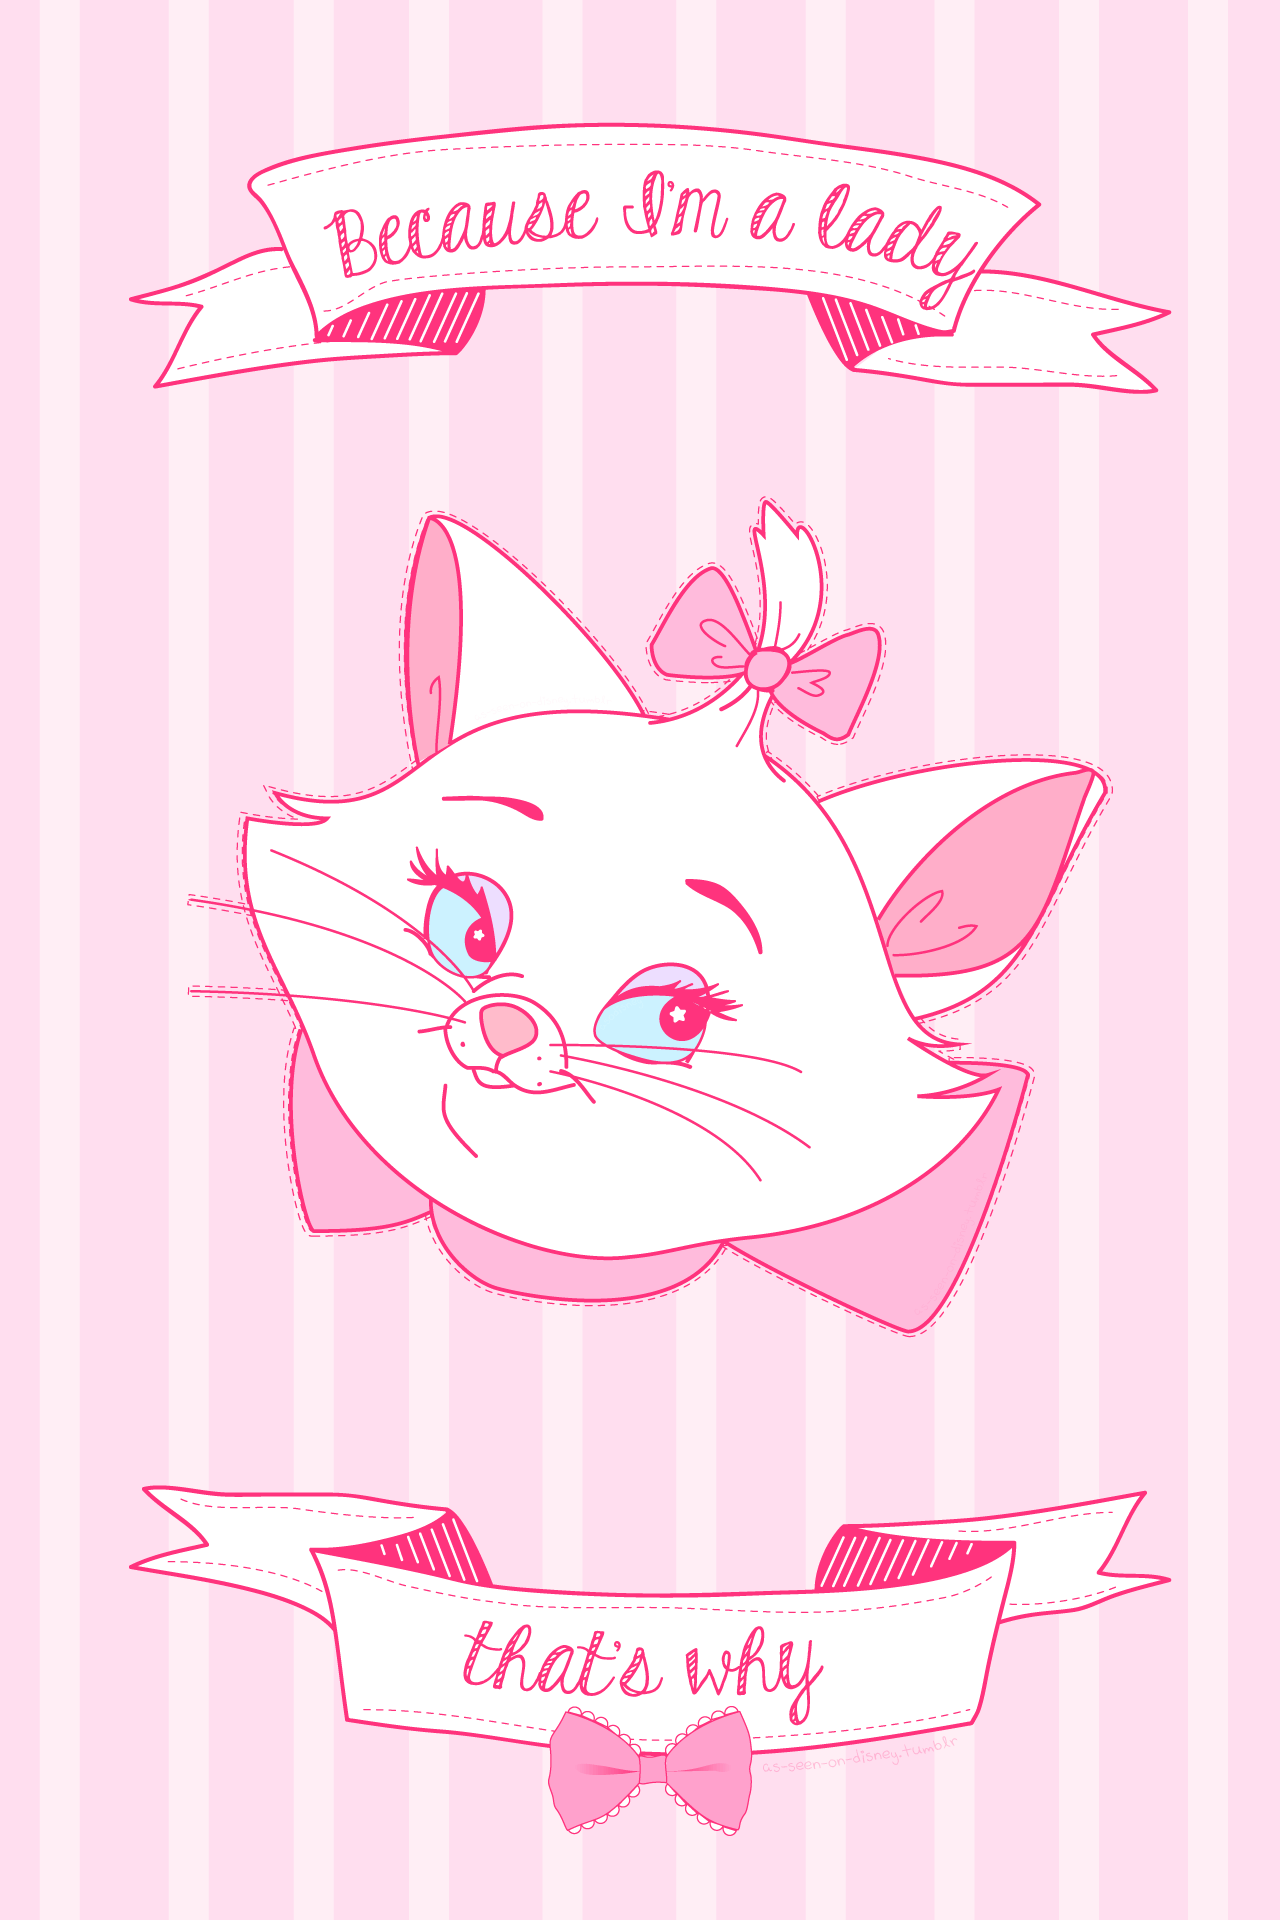 Everything Girly. Aristocats, Im a lady, Marie aristocats